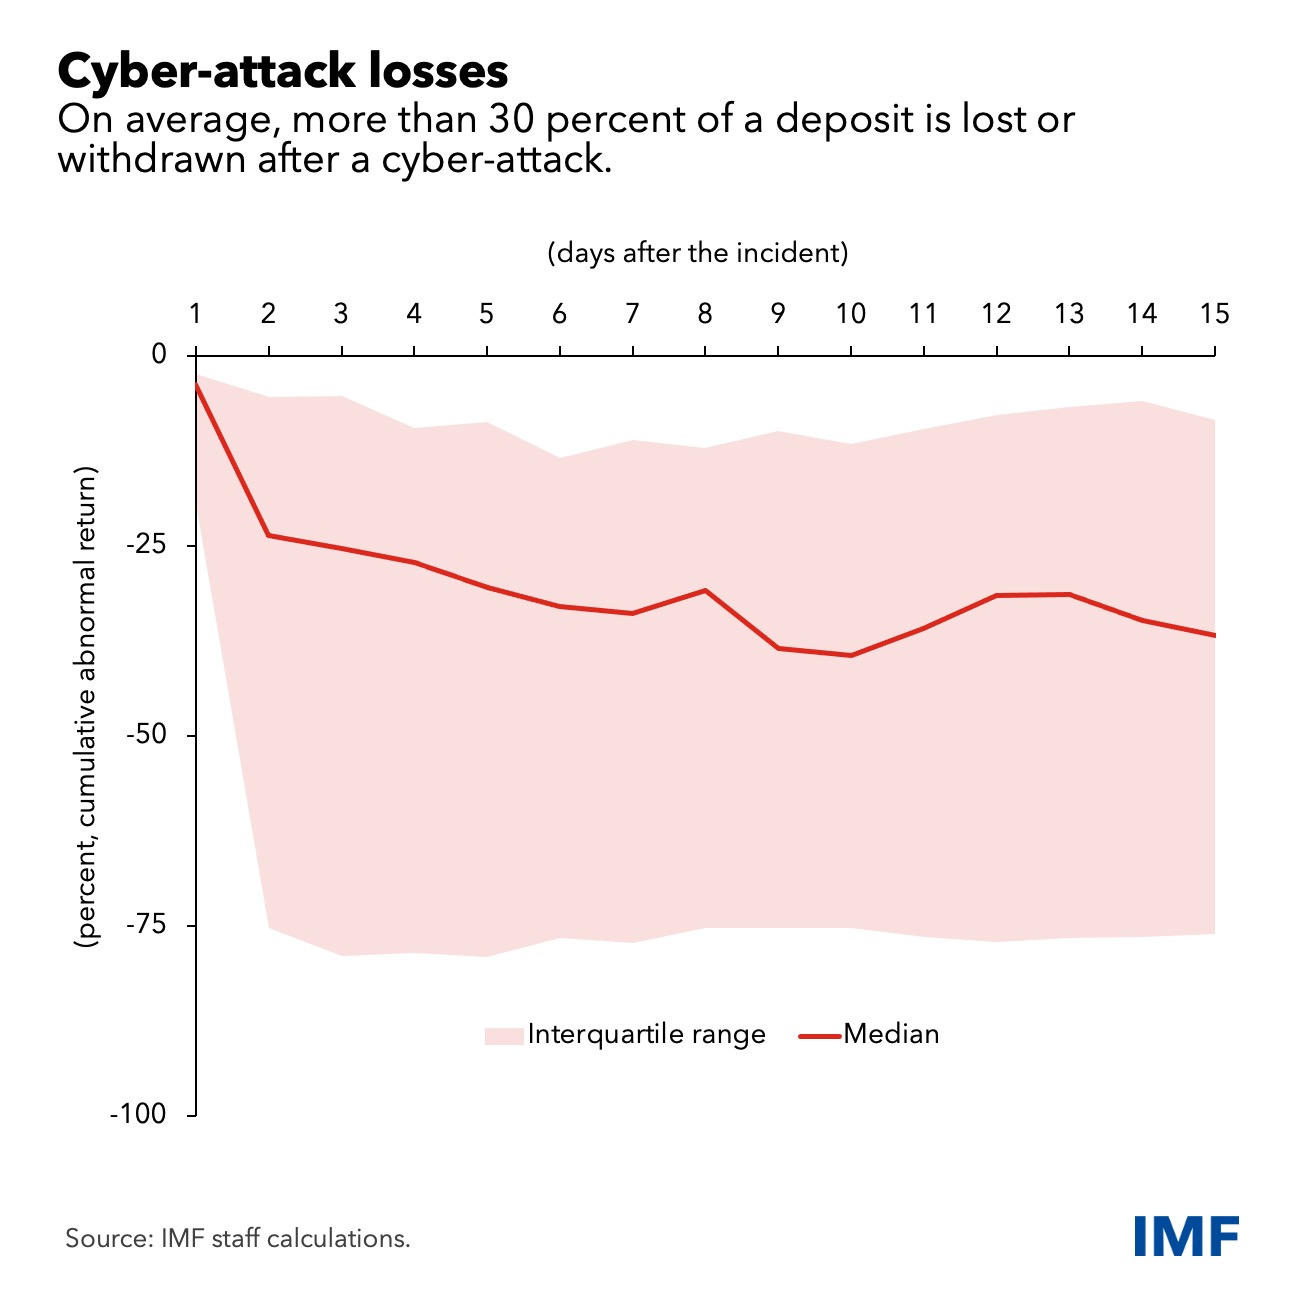 graph showing loss of deposits or withdrawals due to cyberattacks